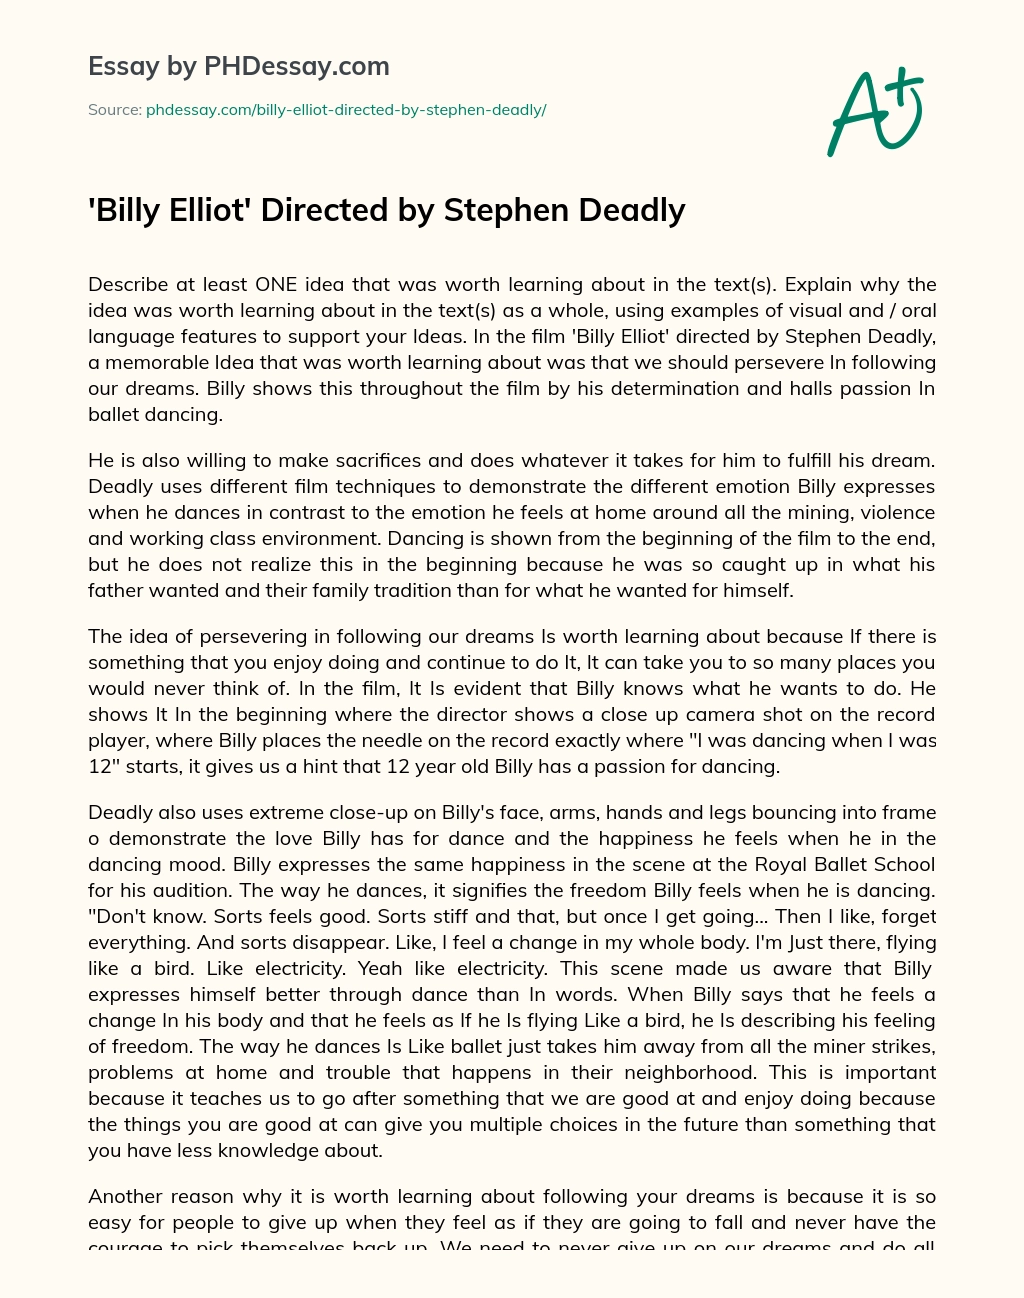 Billy Elliot Directed by Stephen Deadly essay